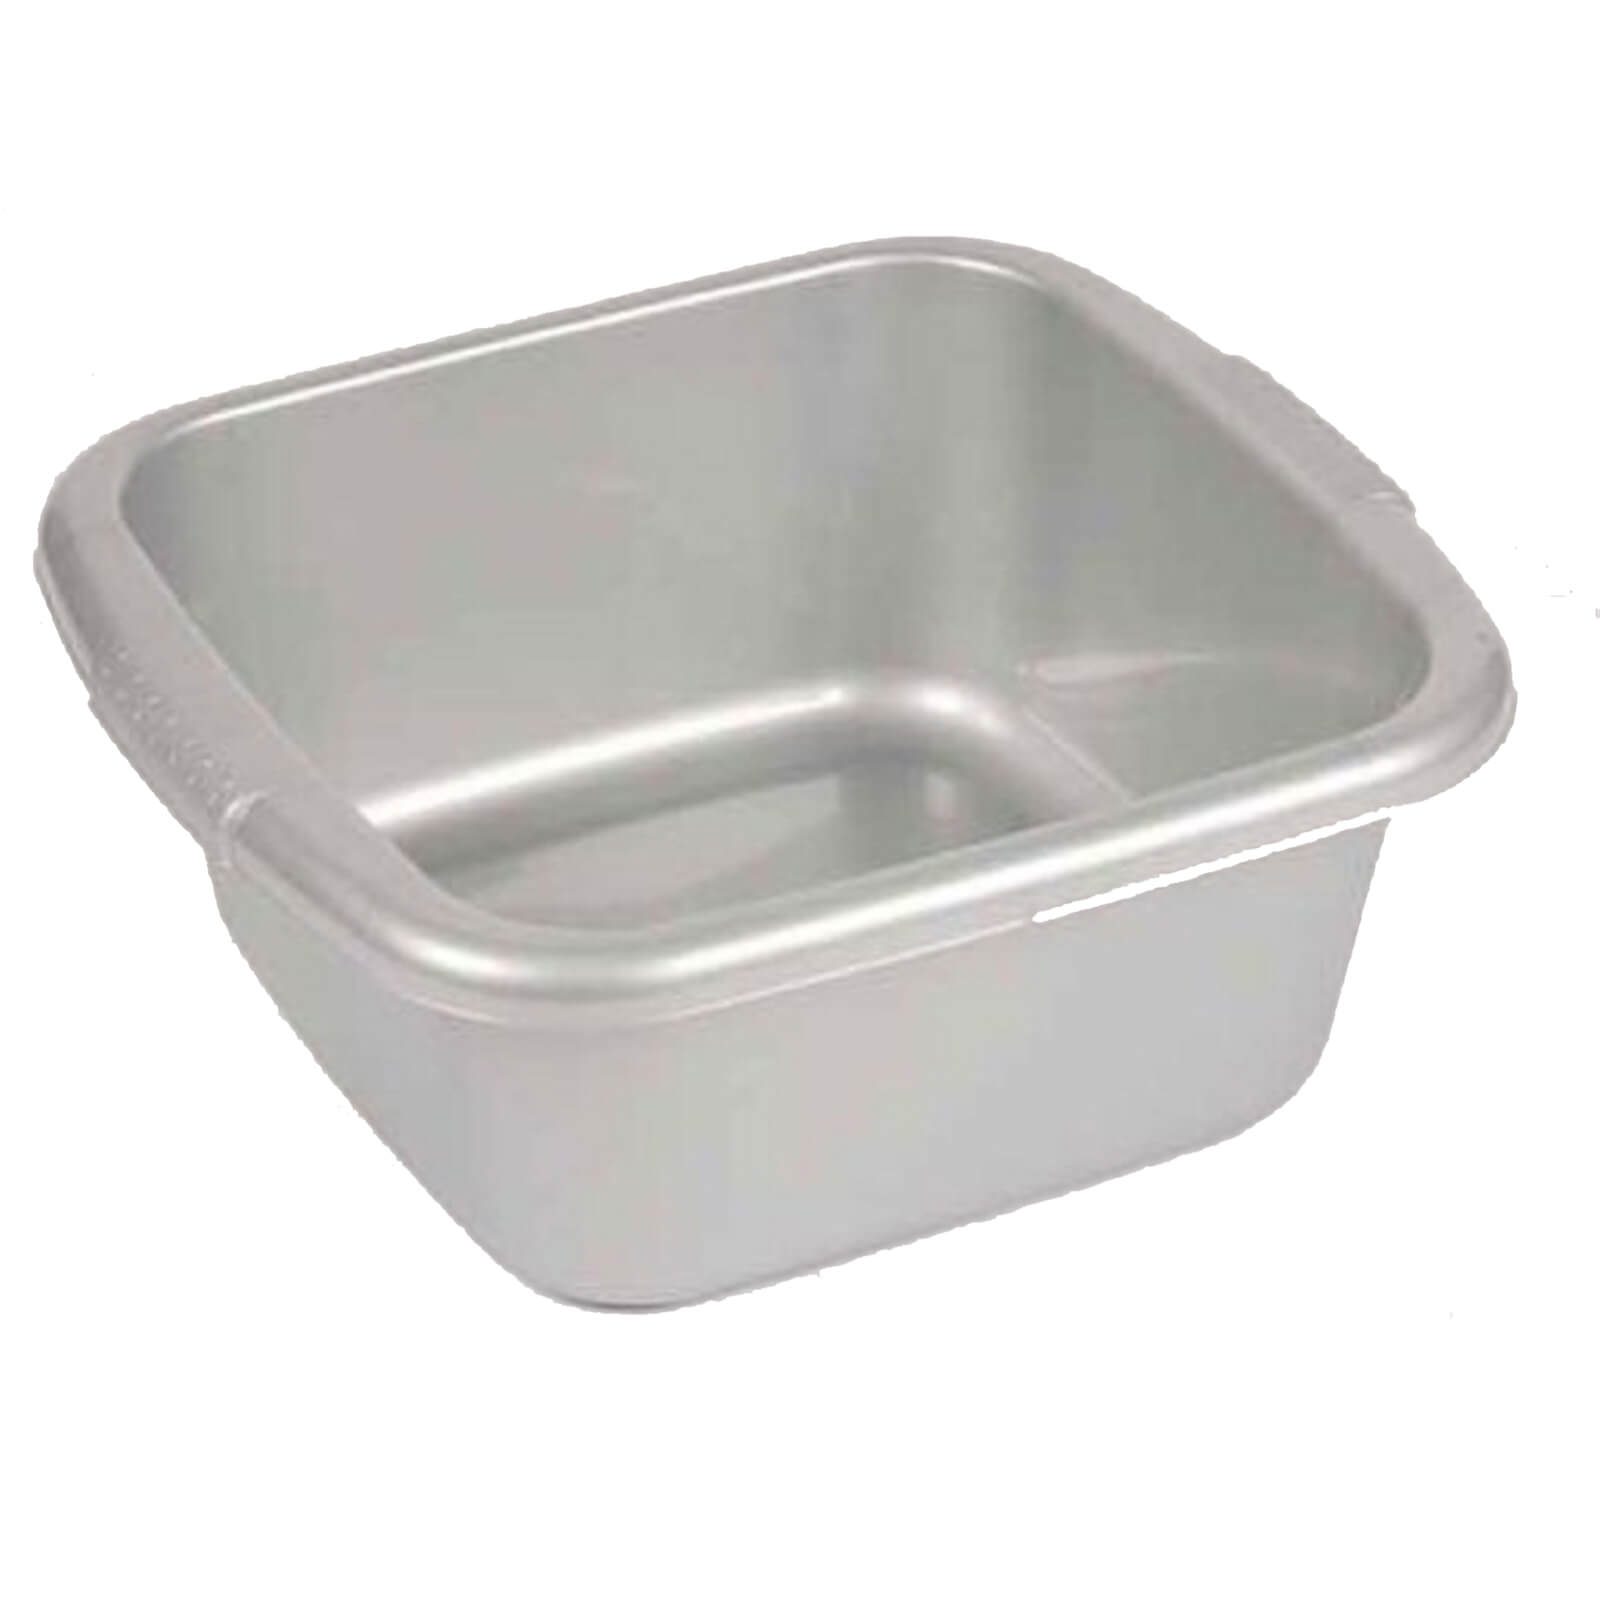 Photo of Curver Square Washing Bowl - Silver